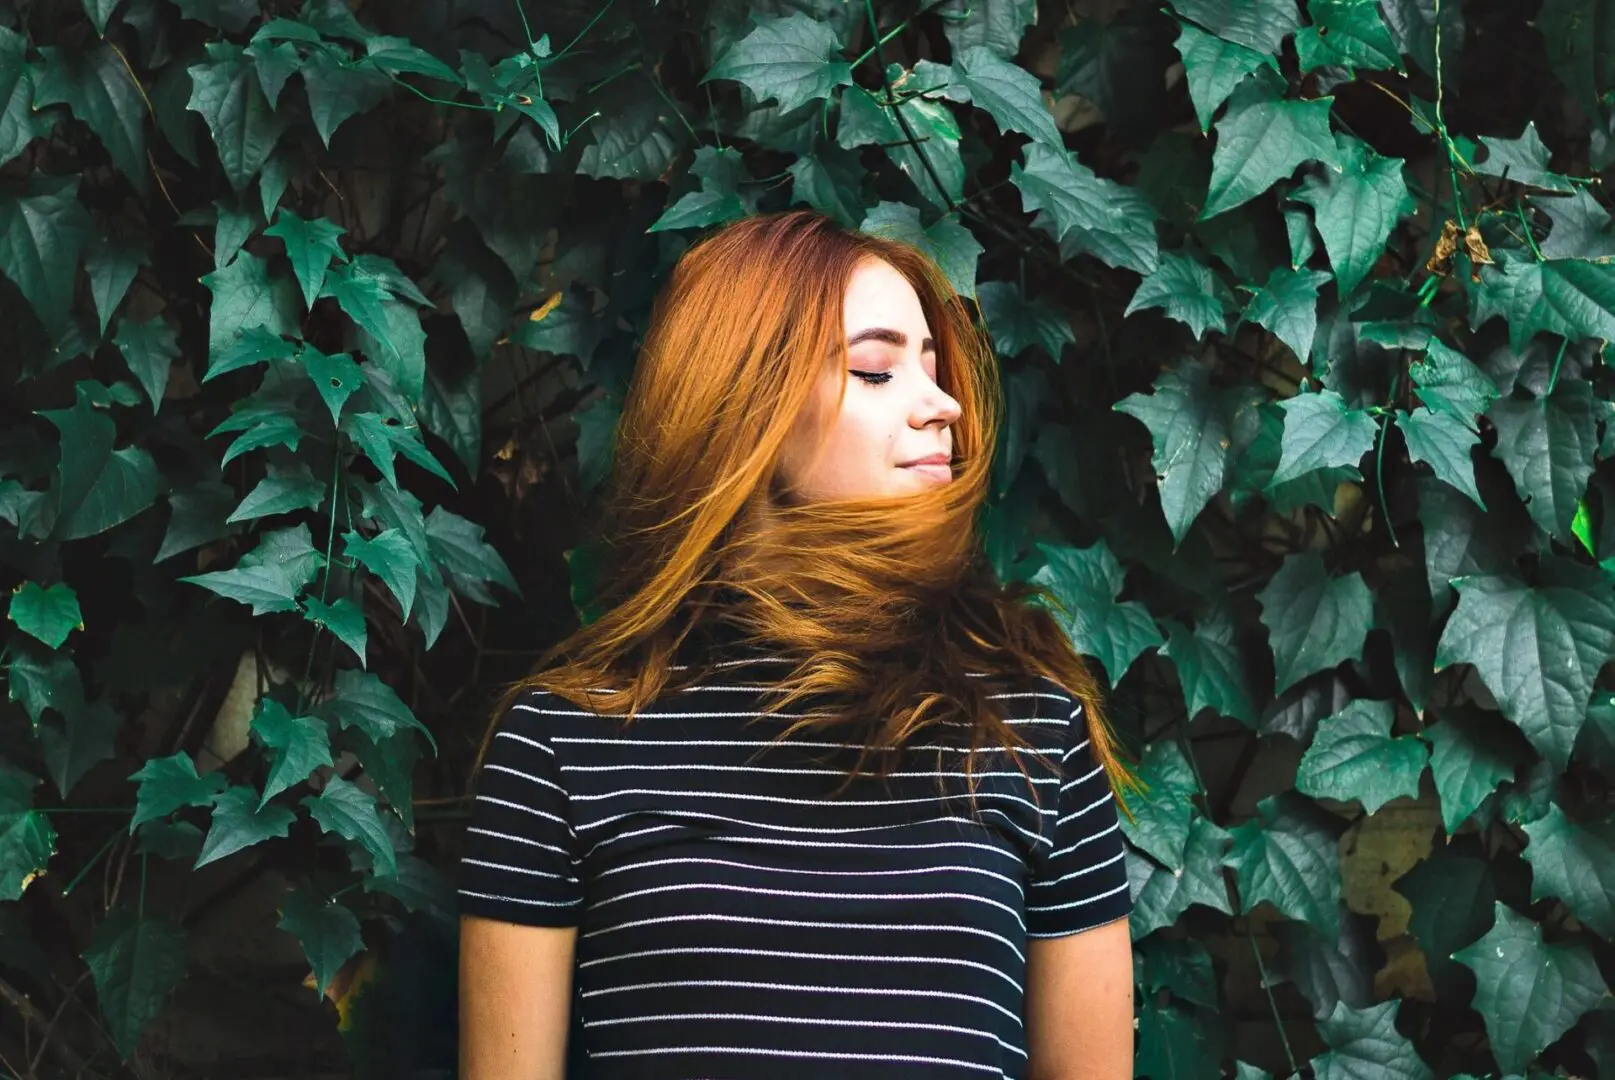 A woman with red hair standing in front of ivy.